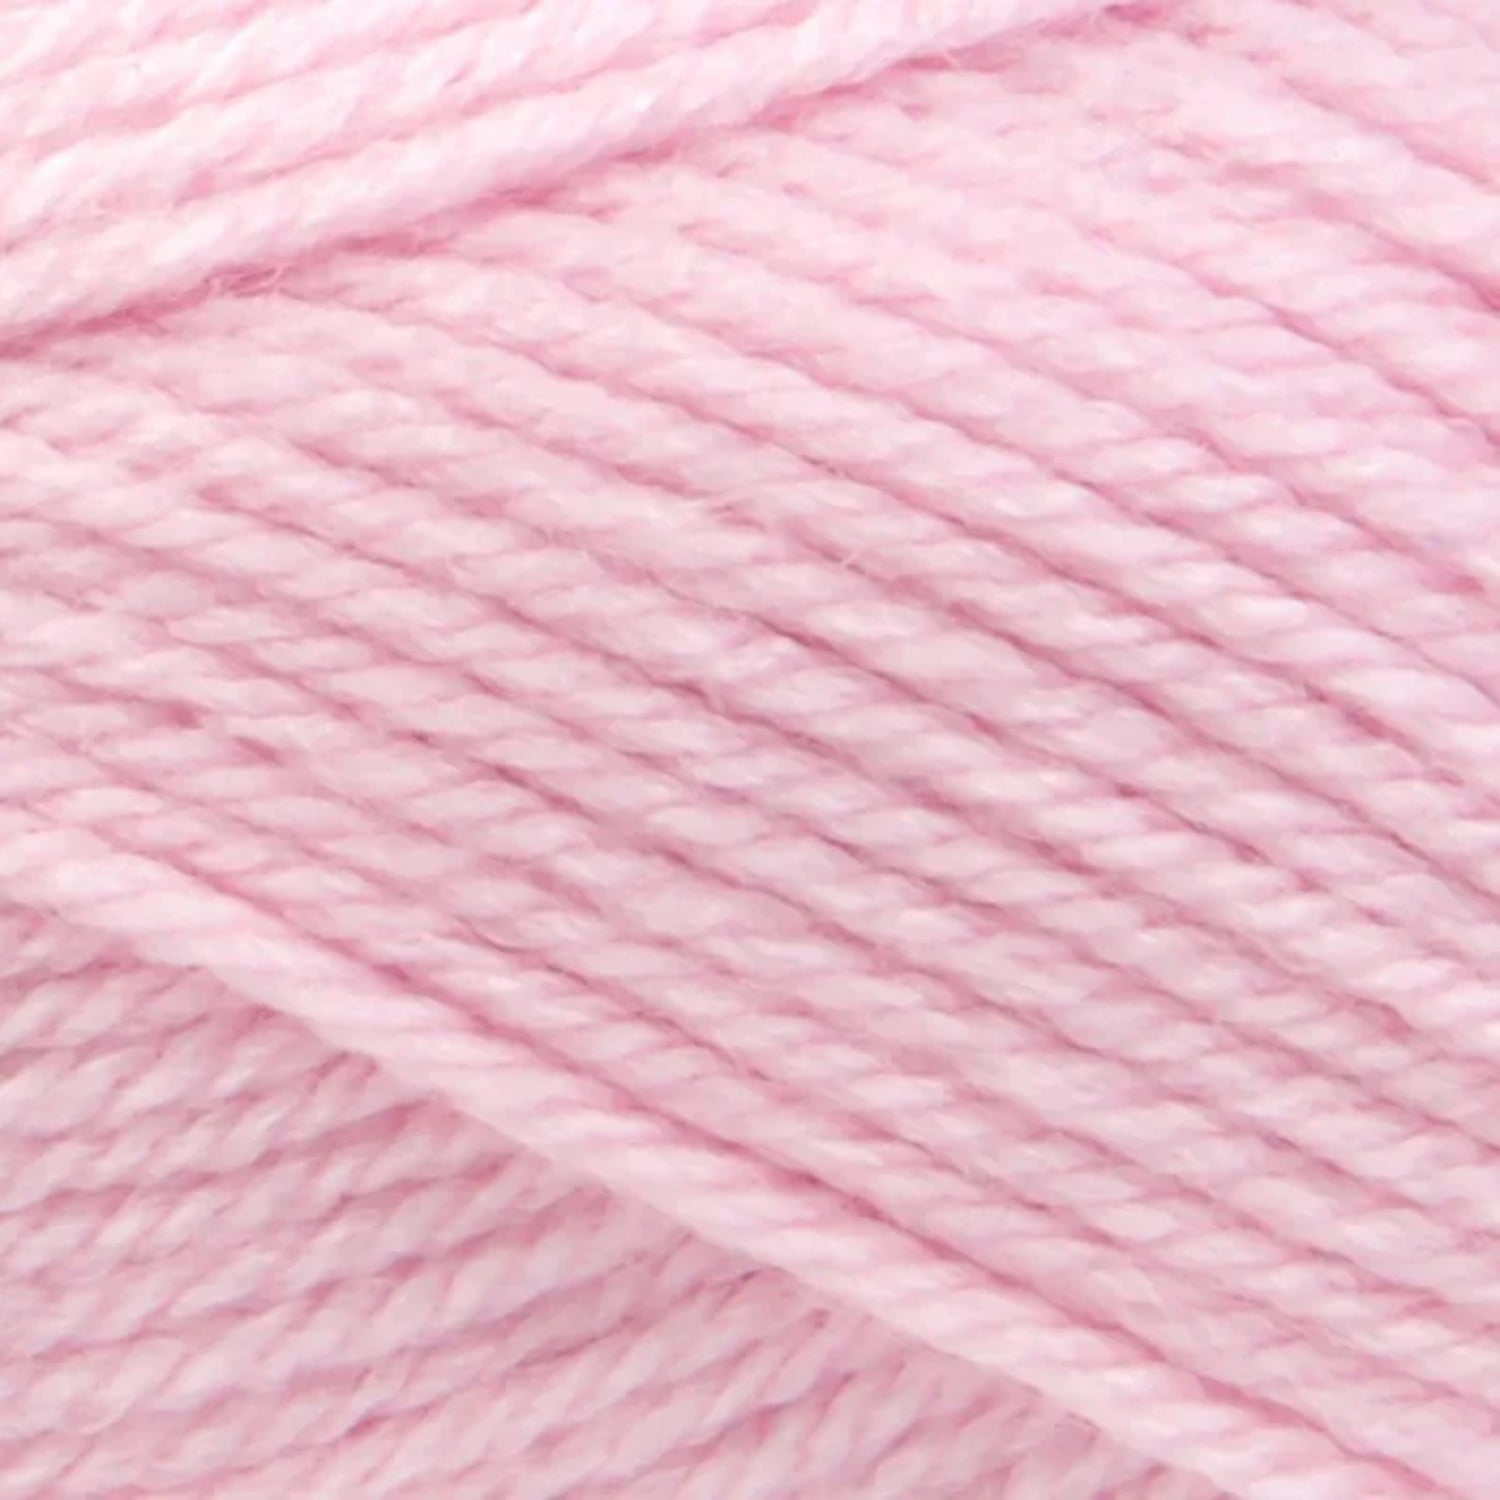 Lion Brand Baby Soft Yarn Light Pale Pink White Lot of 2 Skeins Variegated